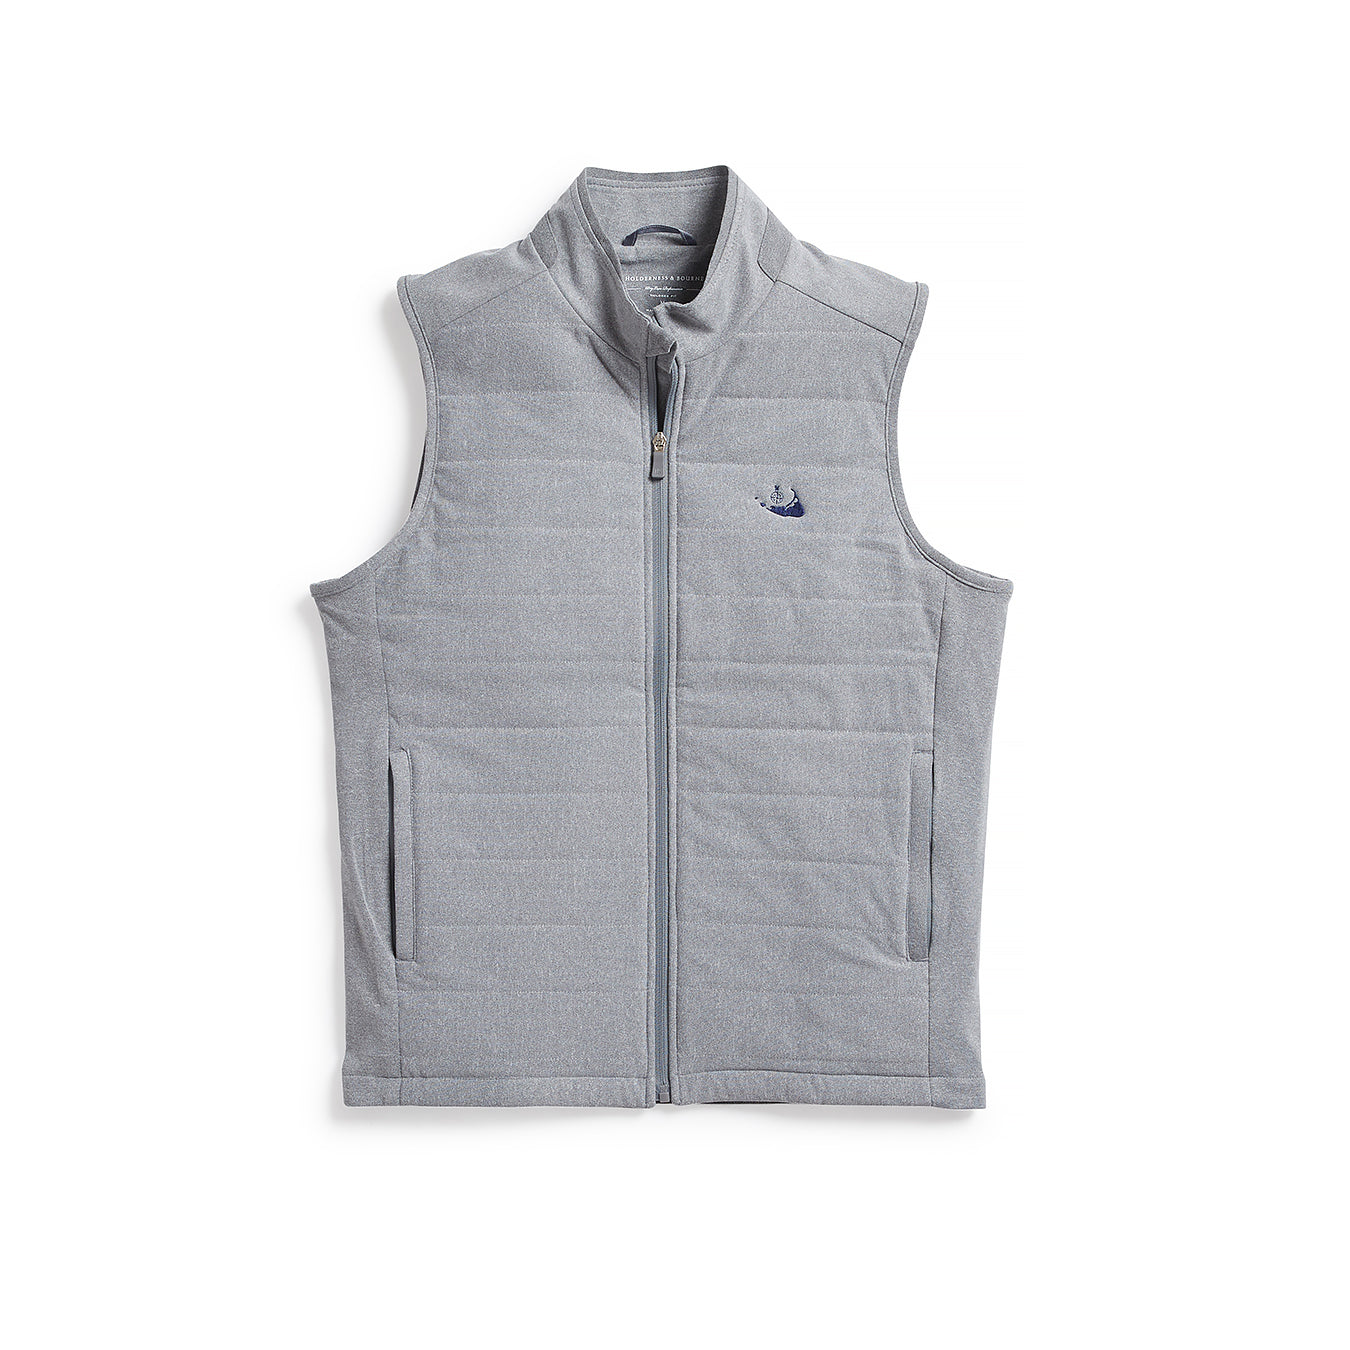 Holderness & Bourne The Perry Vest - Heather Grey